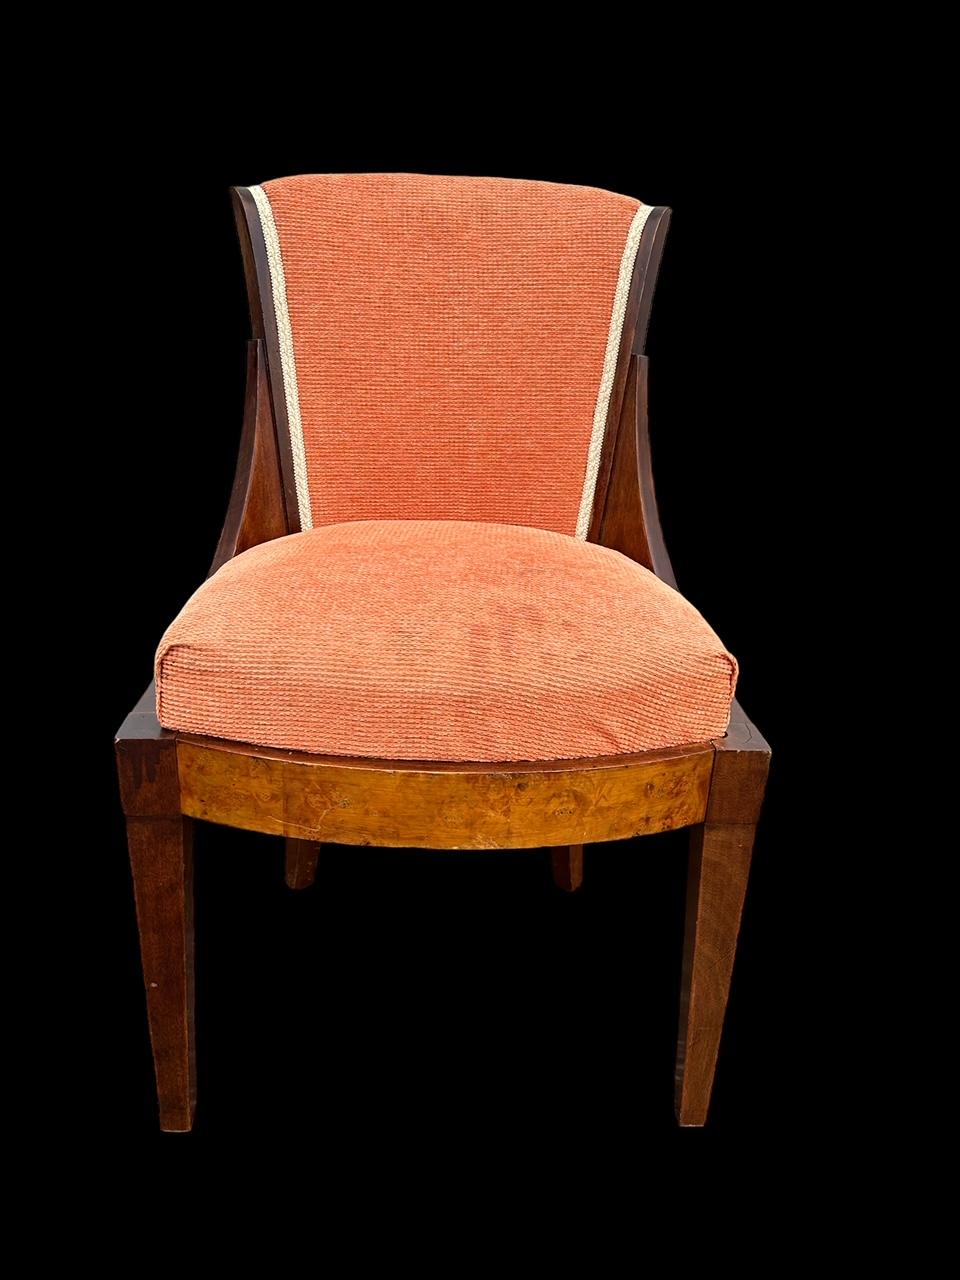 beautiful art deco chair from the 1930's in its original condition 
beautiful design and quality of the french mid century 
